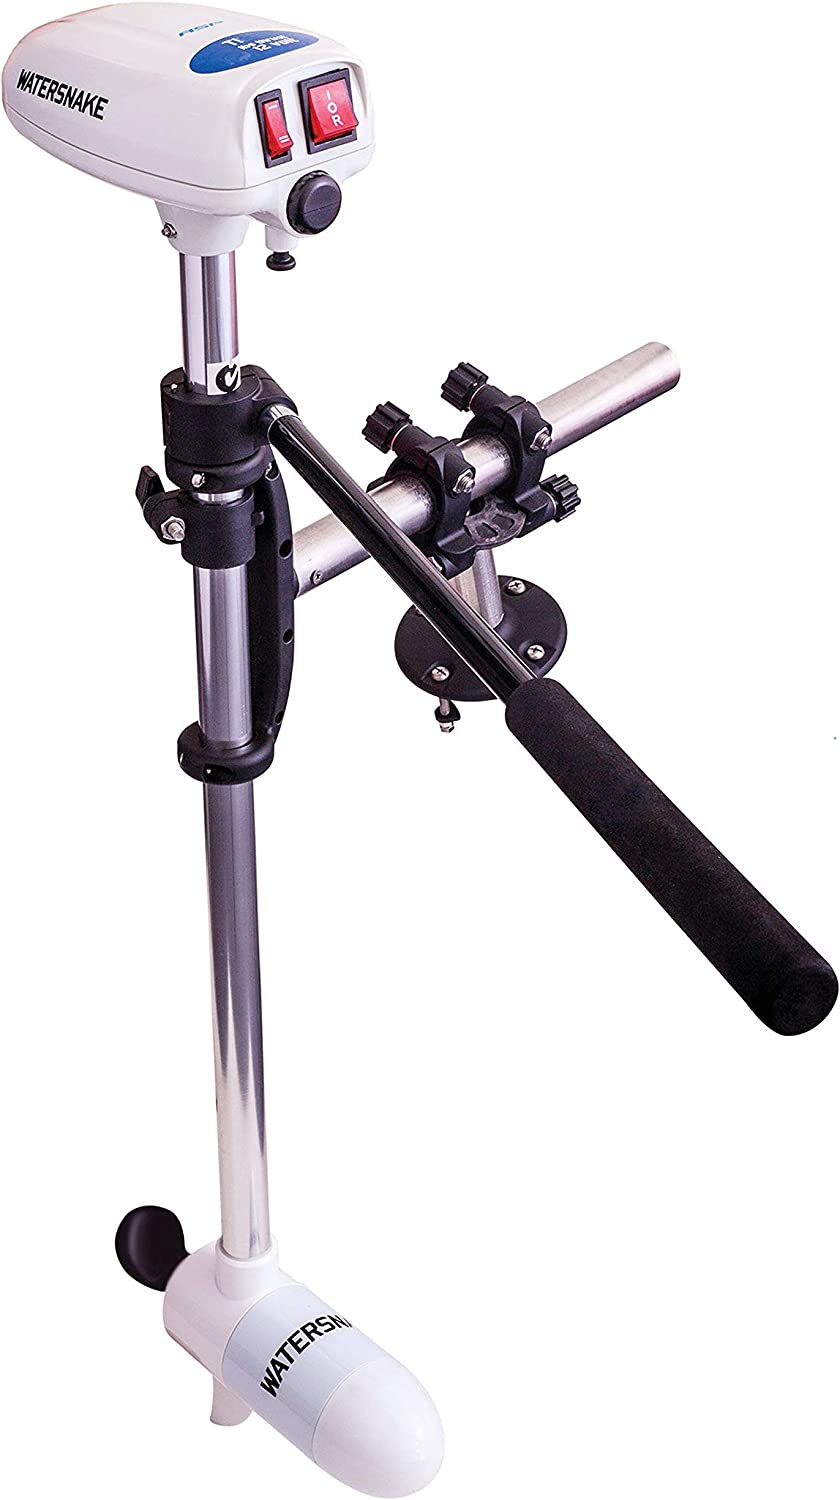 A white Watersnake T18 trolling motor which is commonly used for small fishing vessels.